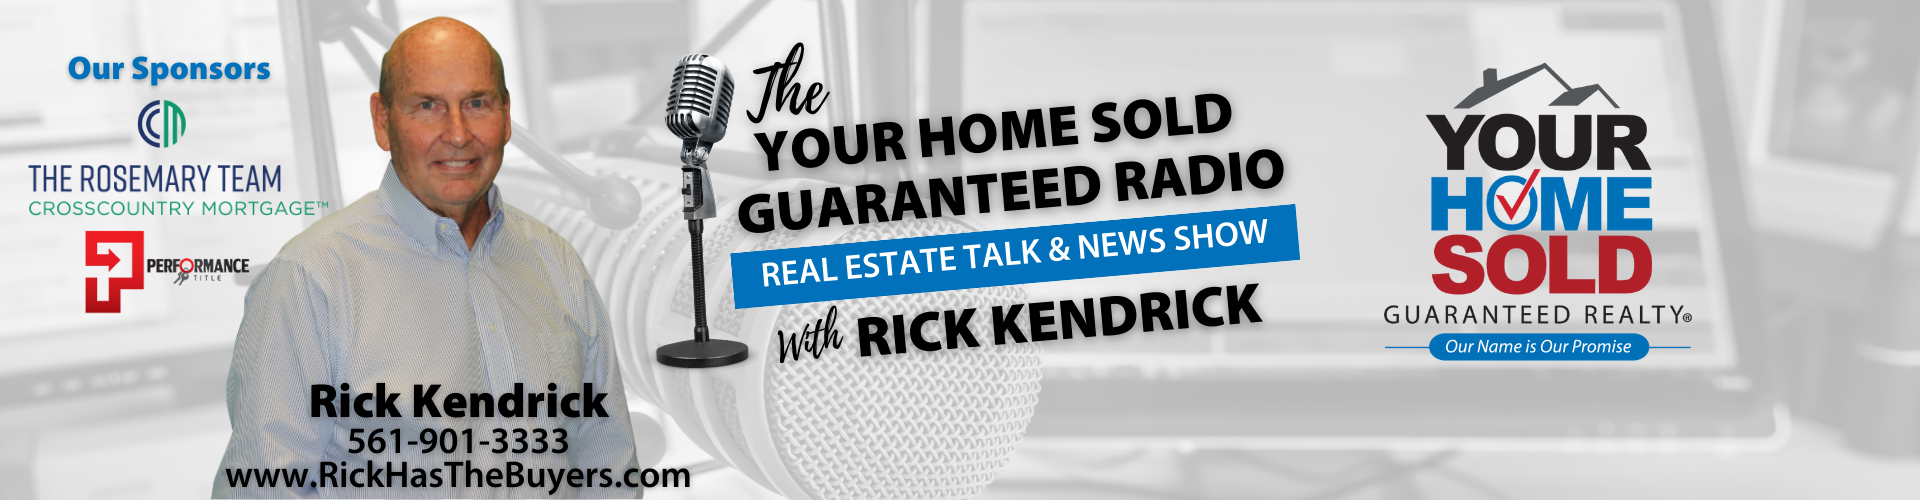 The Your Home Sold Guaranteed Radio Real Estate Talk & News Show with Rick Kendrick